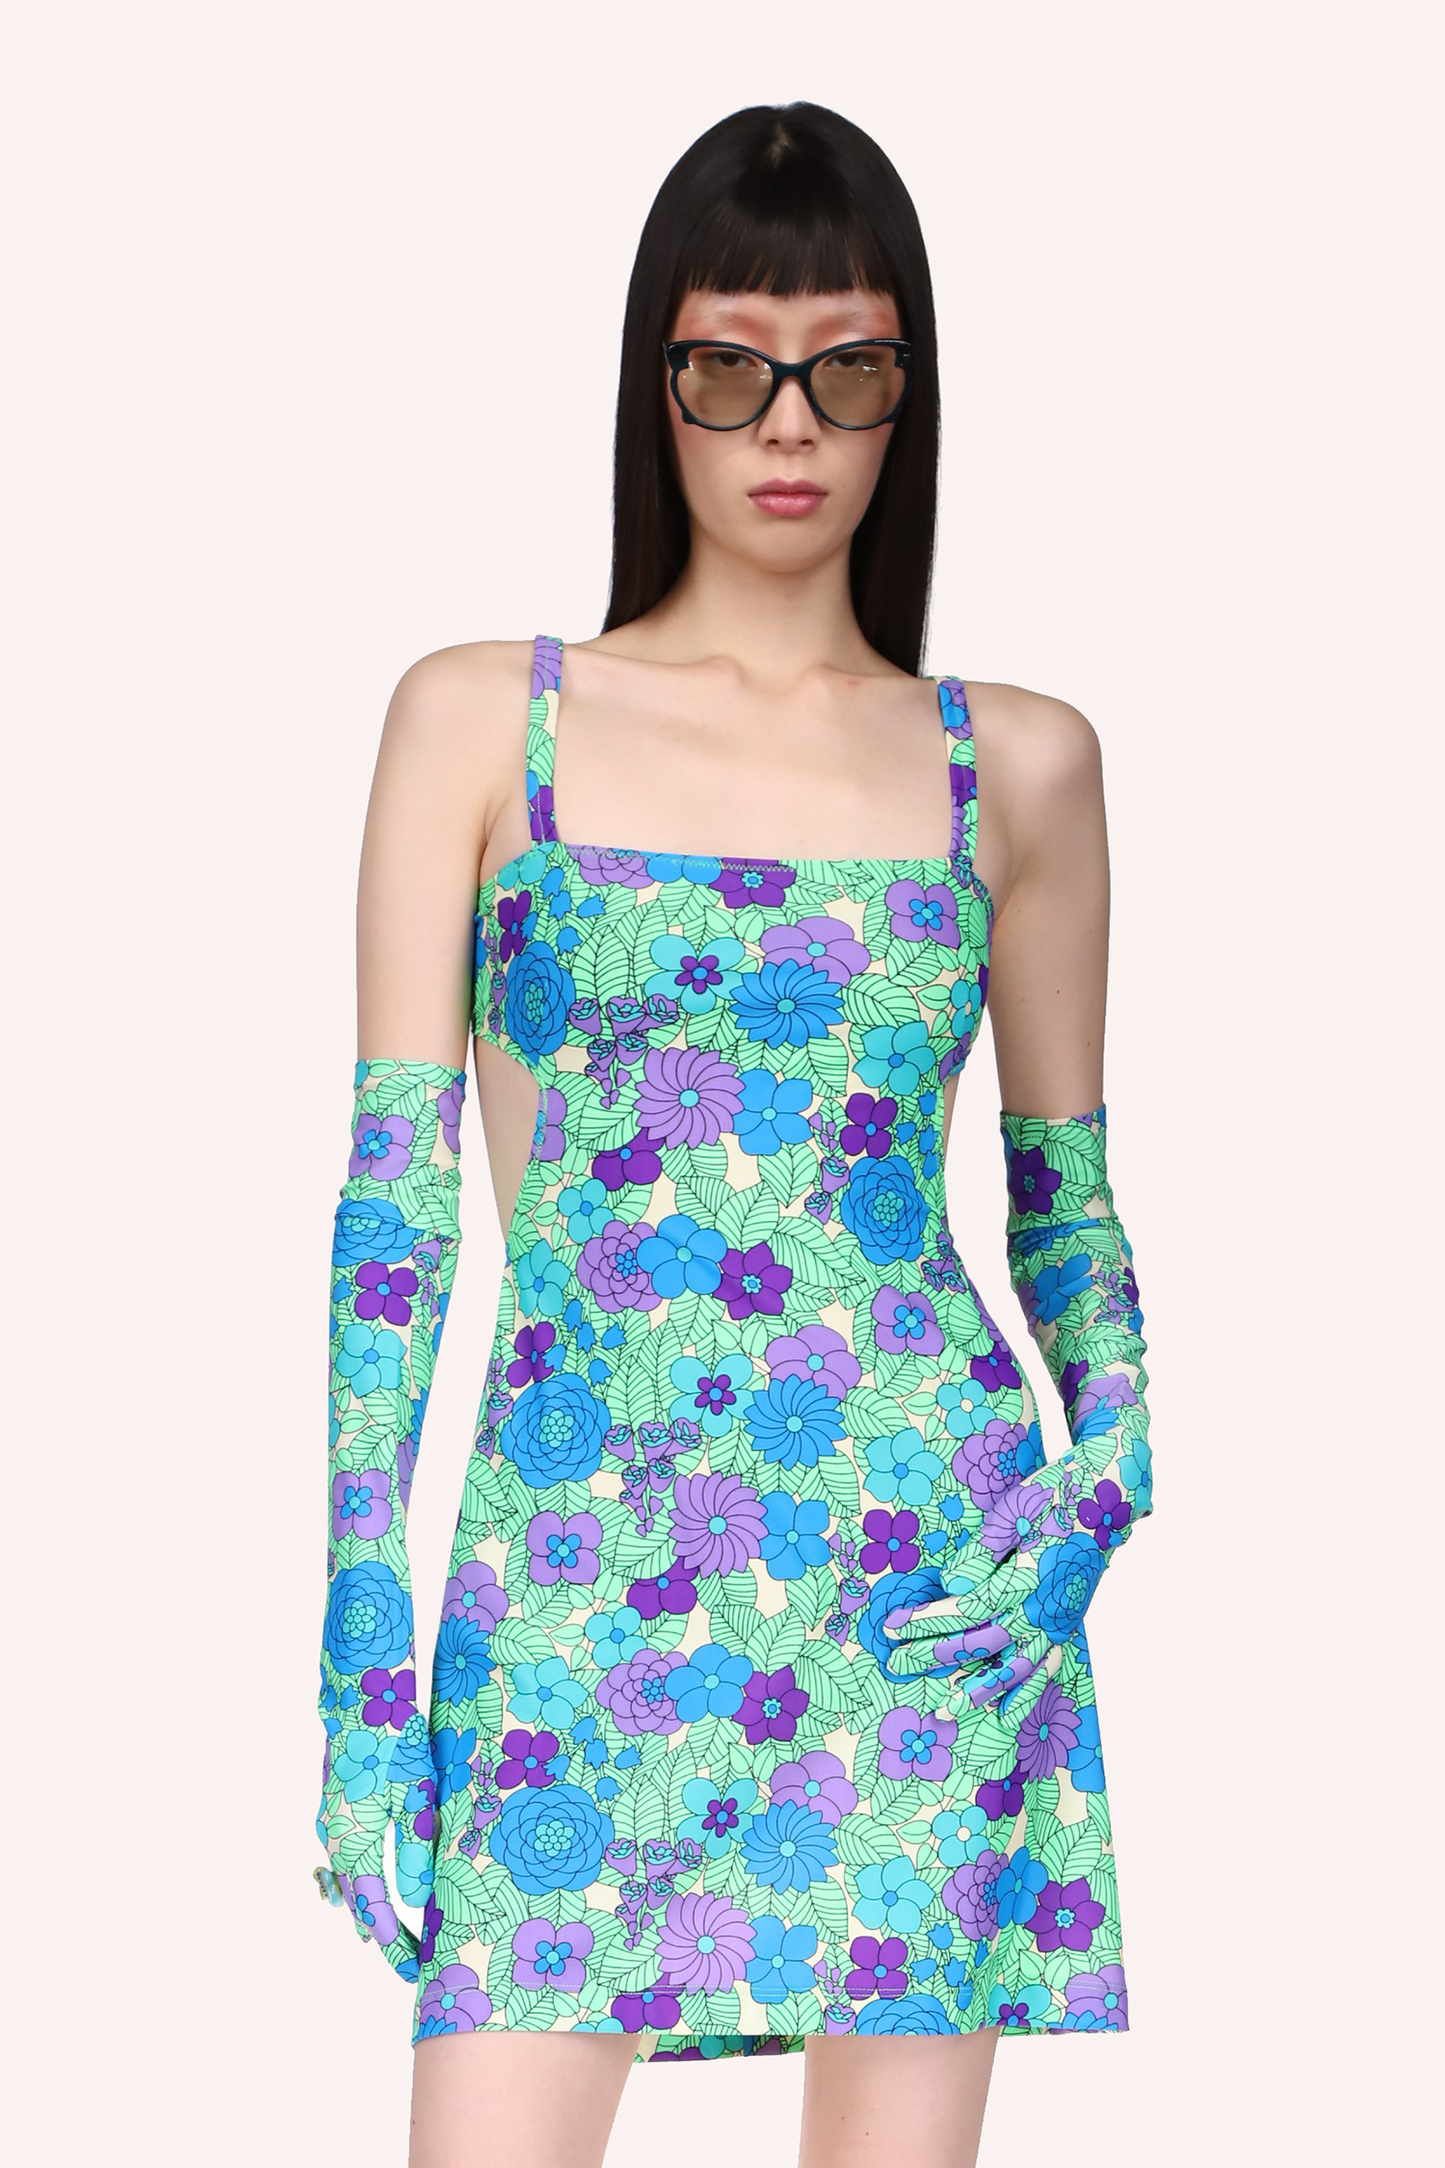 Gloves, above elbow long, floral design in hue of green can be pair with dress with the same pattern